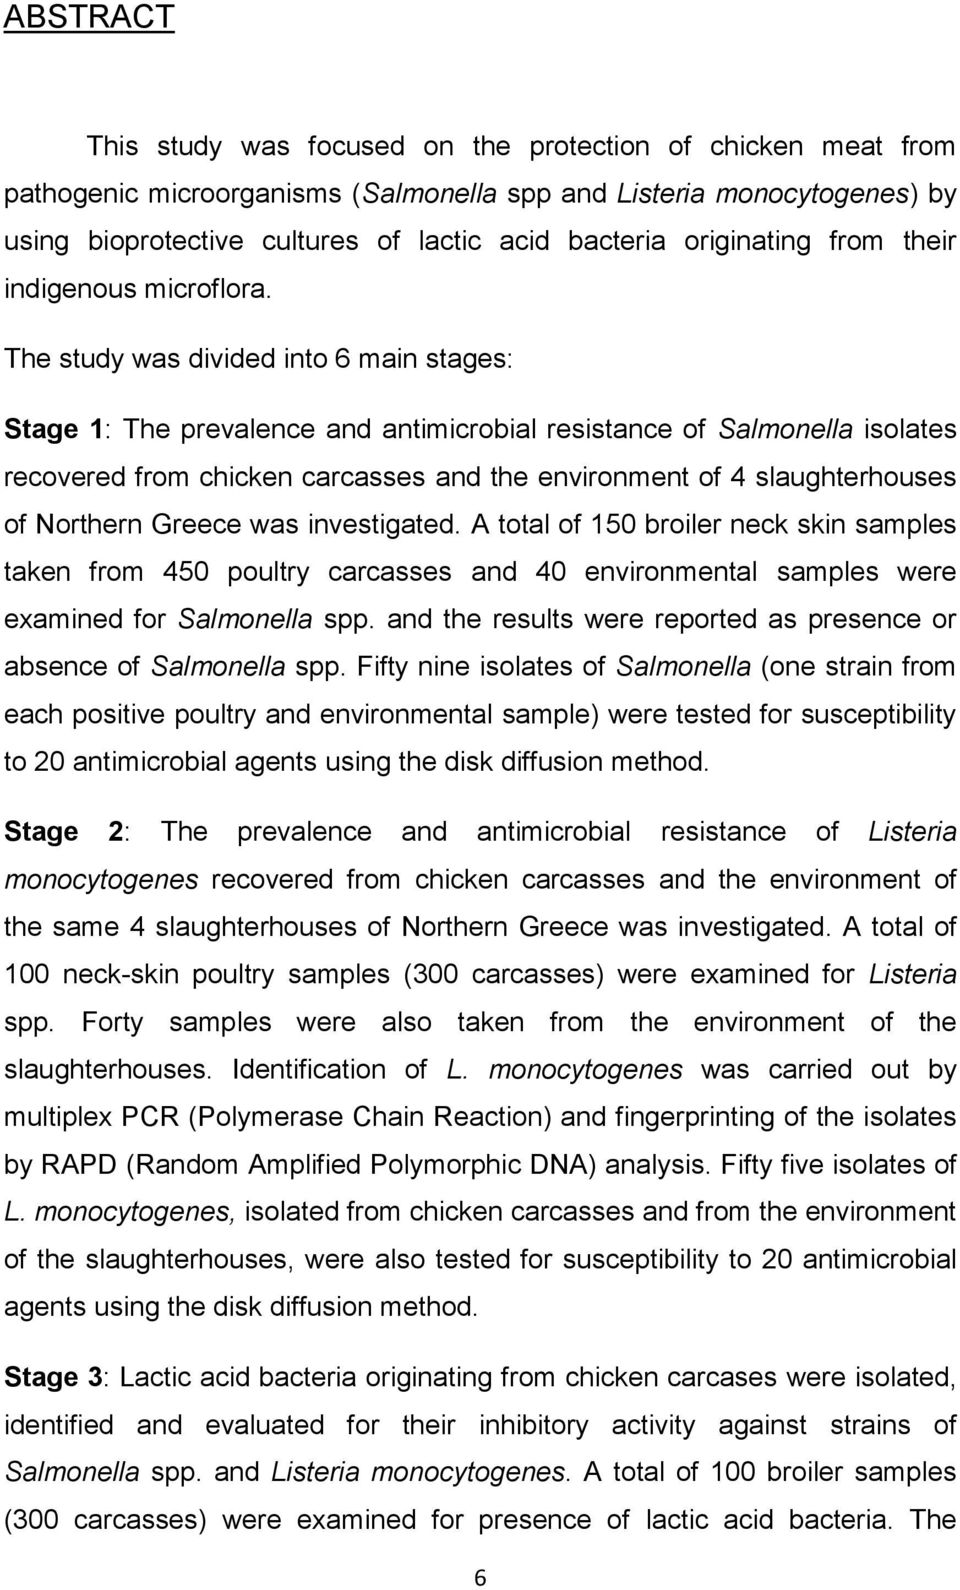 The study was divided into 6 main stages: Stage 1: The prevalence and antimicrobial resistance of Salmonella isolates recovered from chicken carcasses and the environment of 4 slaughterhouses of